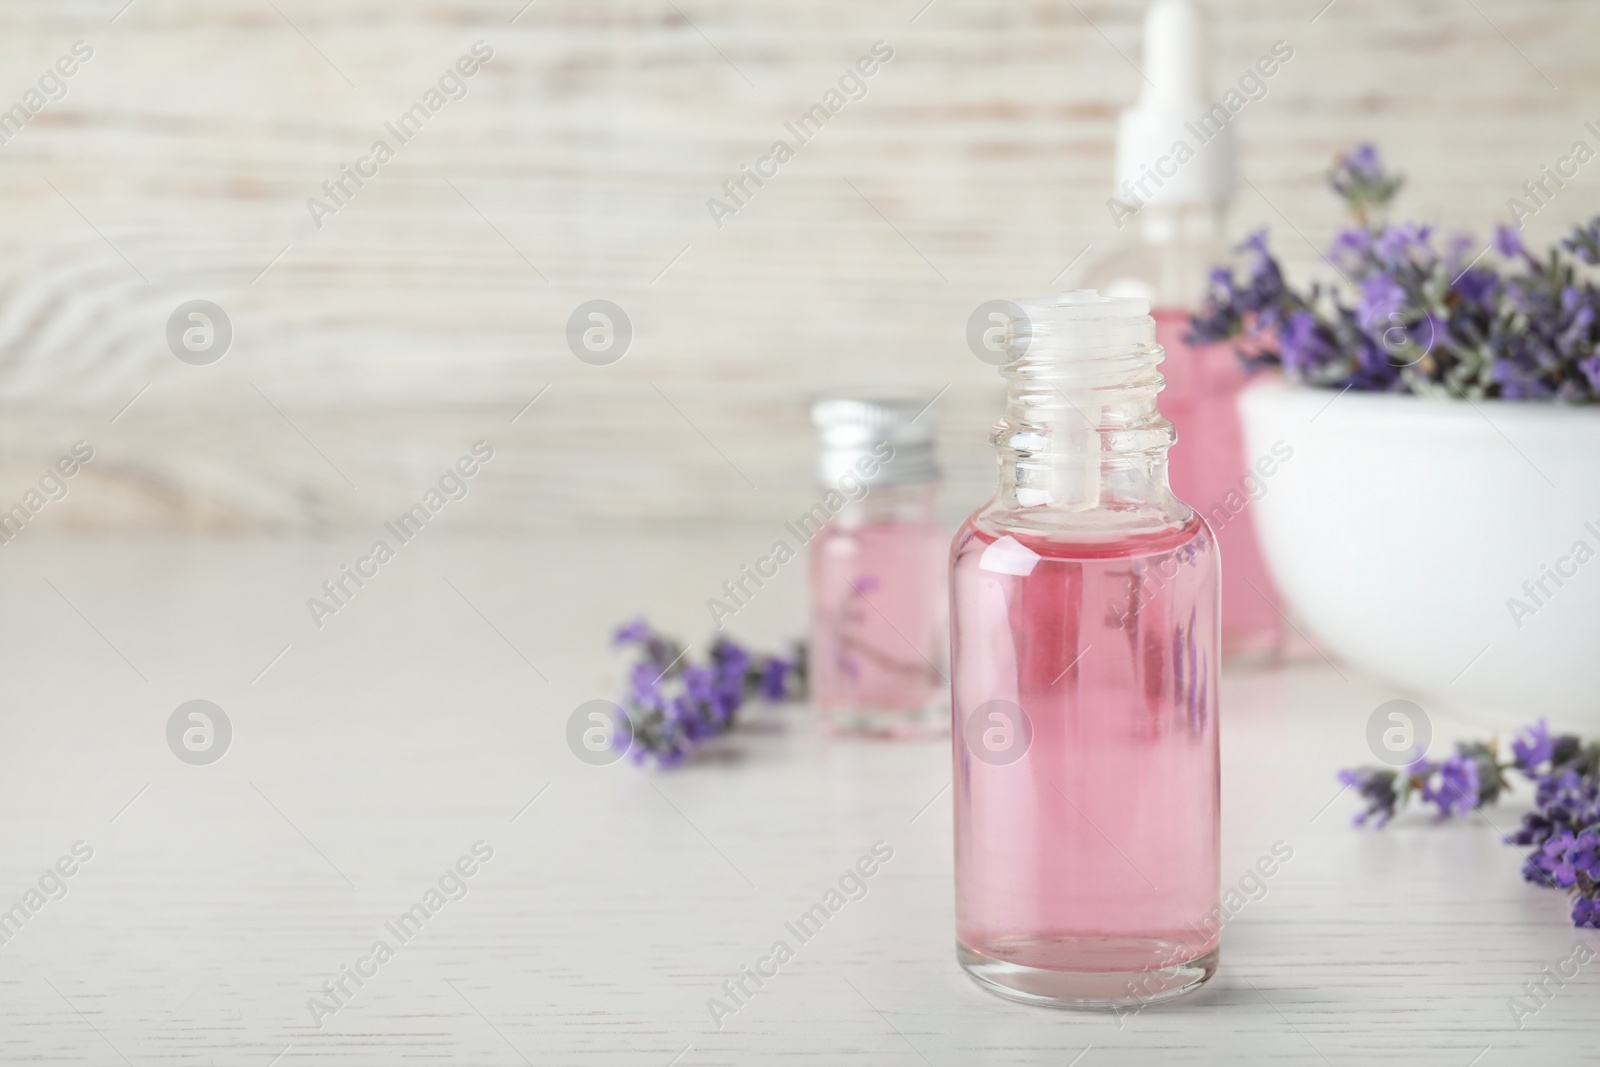 Photo of Bottles of essential oil and lavender flowers on white wooden table. Space for text